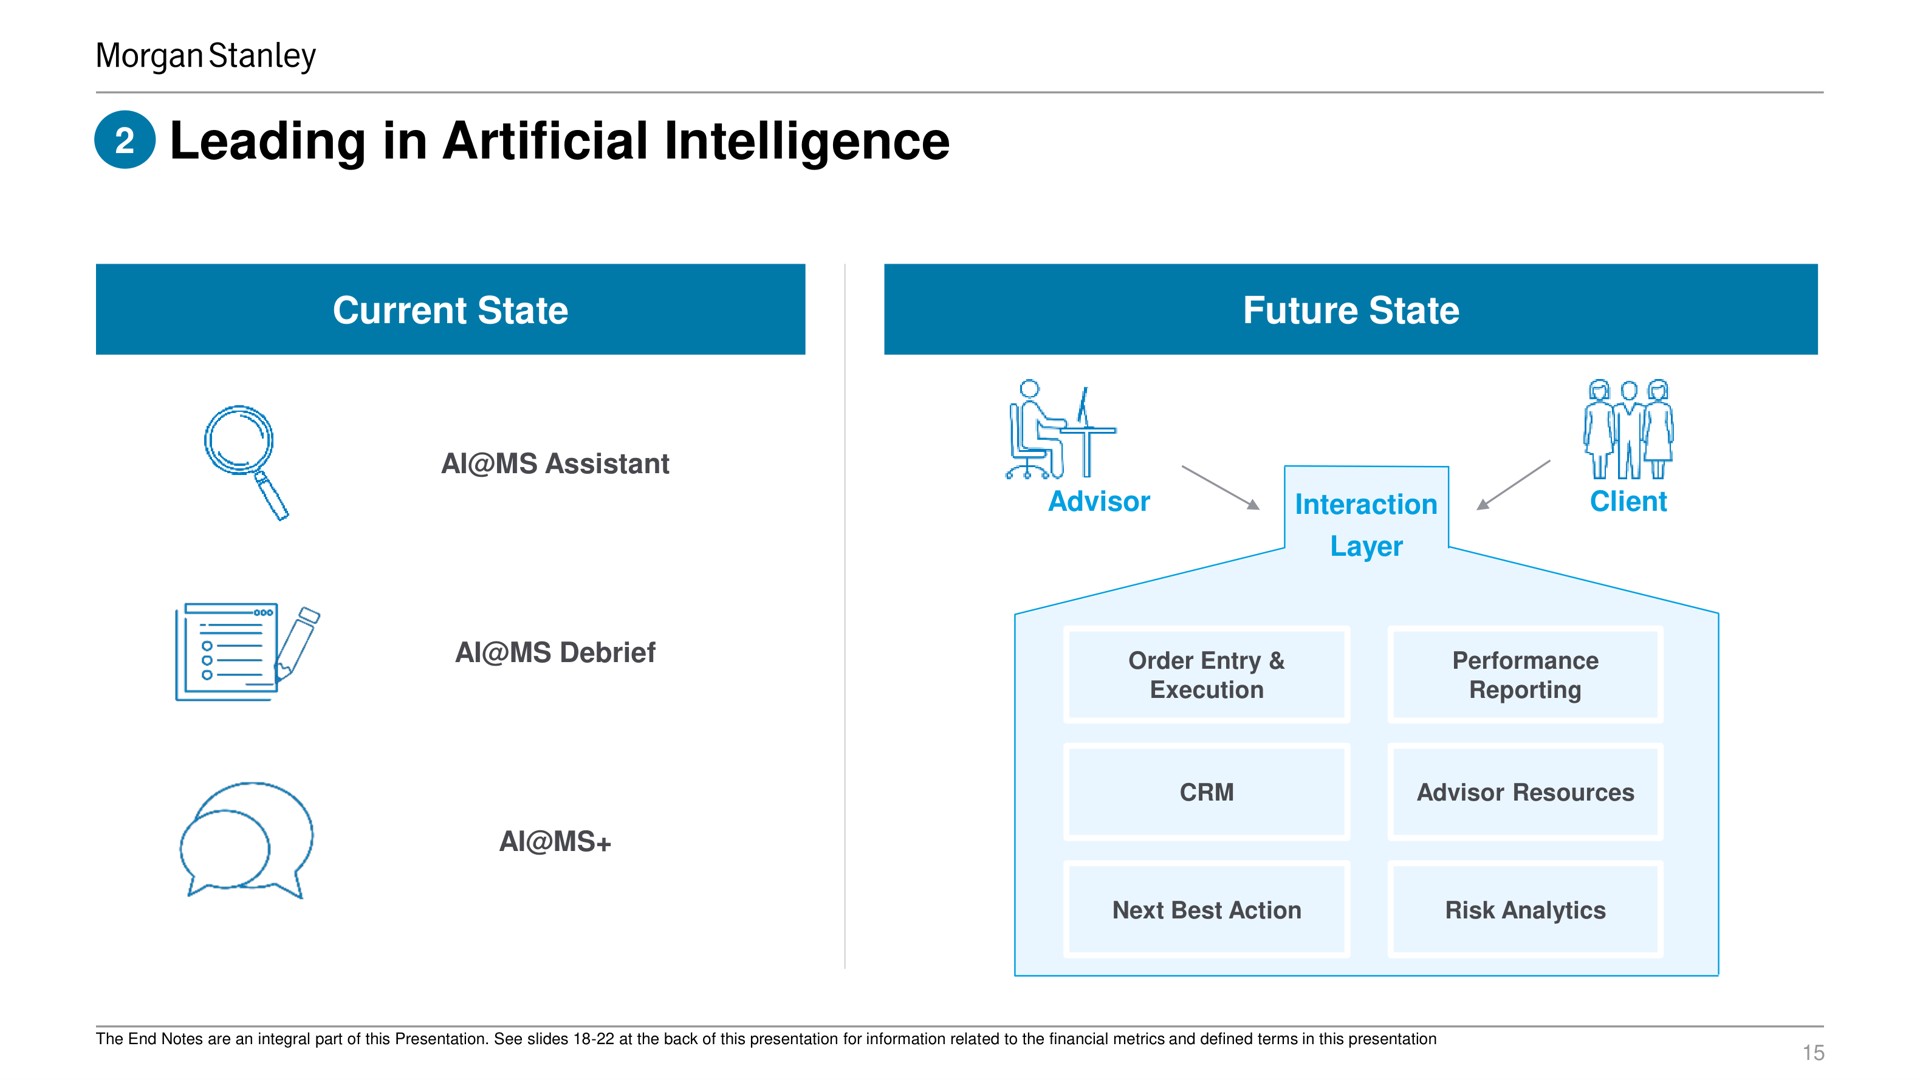 leading in artificial intelligence current state future state assistant debrief advisor interaction layer client | Morgan Stanley